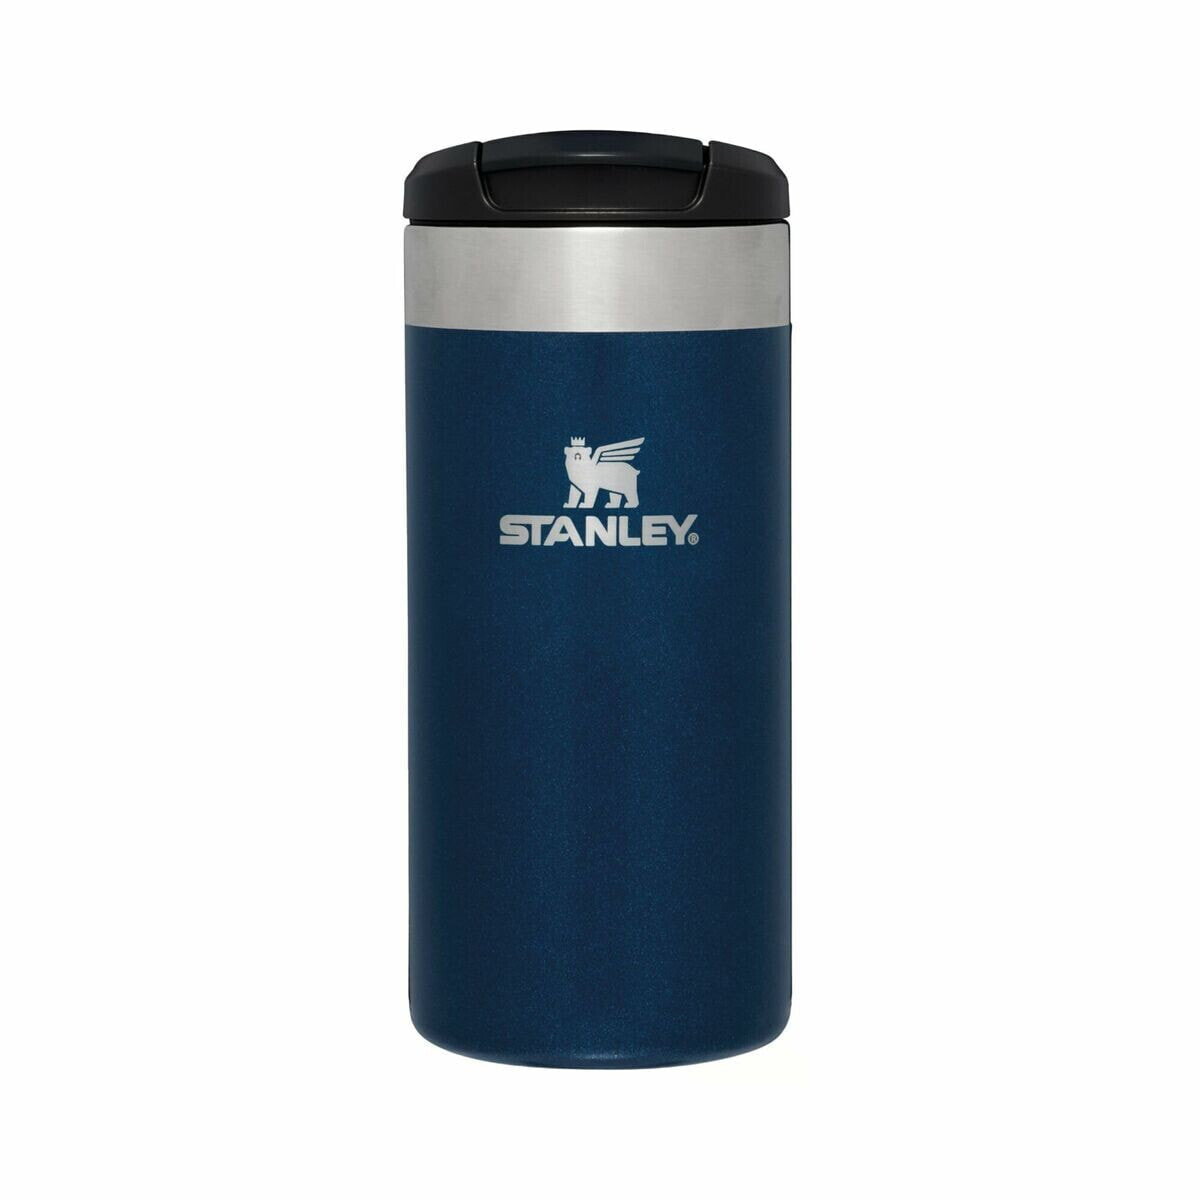 Thermos Stanley 10-10788-074 Blue Stainless steel 350 ml